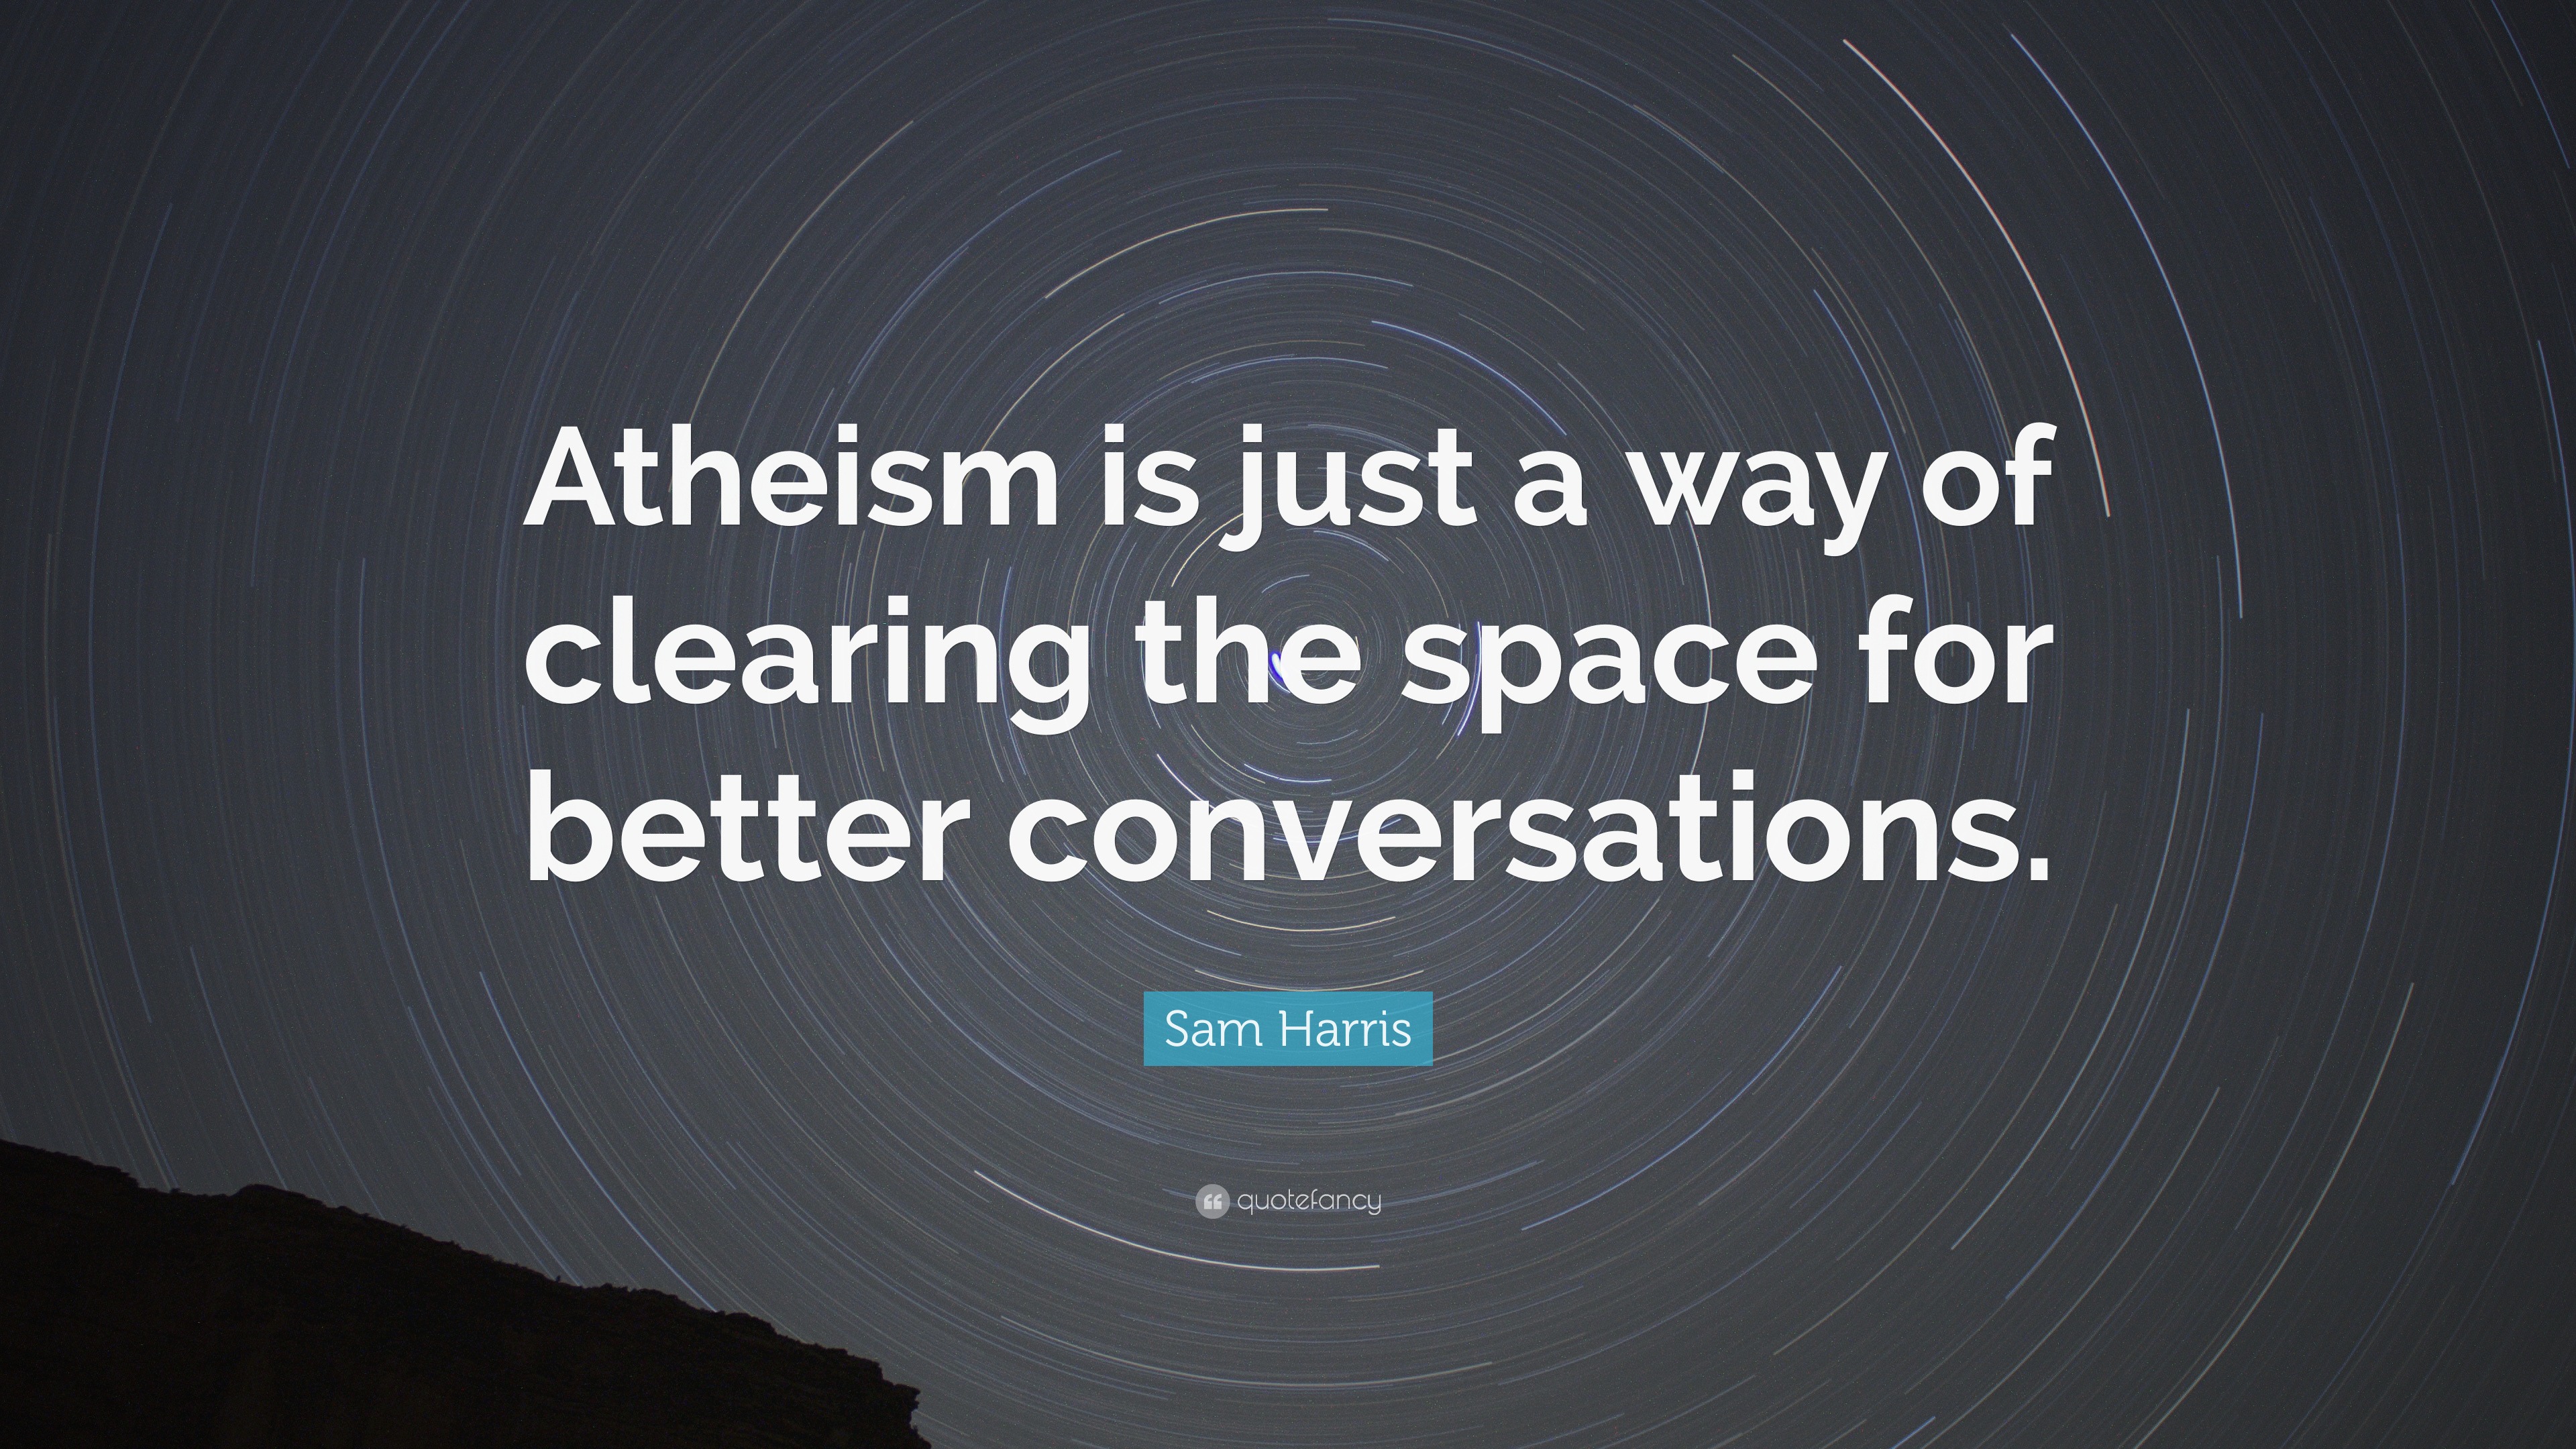 Sam Harris Quote “Atheism is just a way of clearing the space for